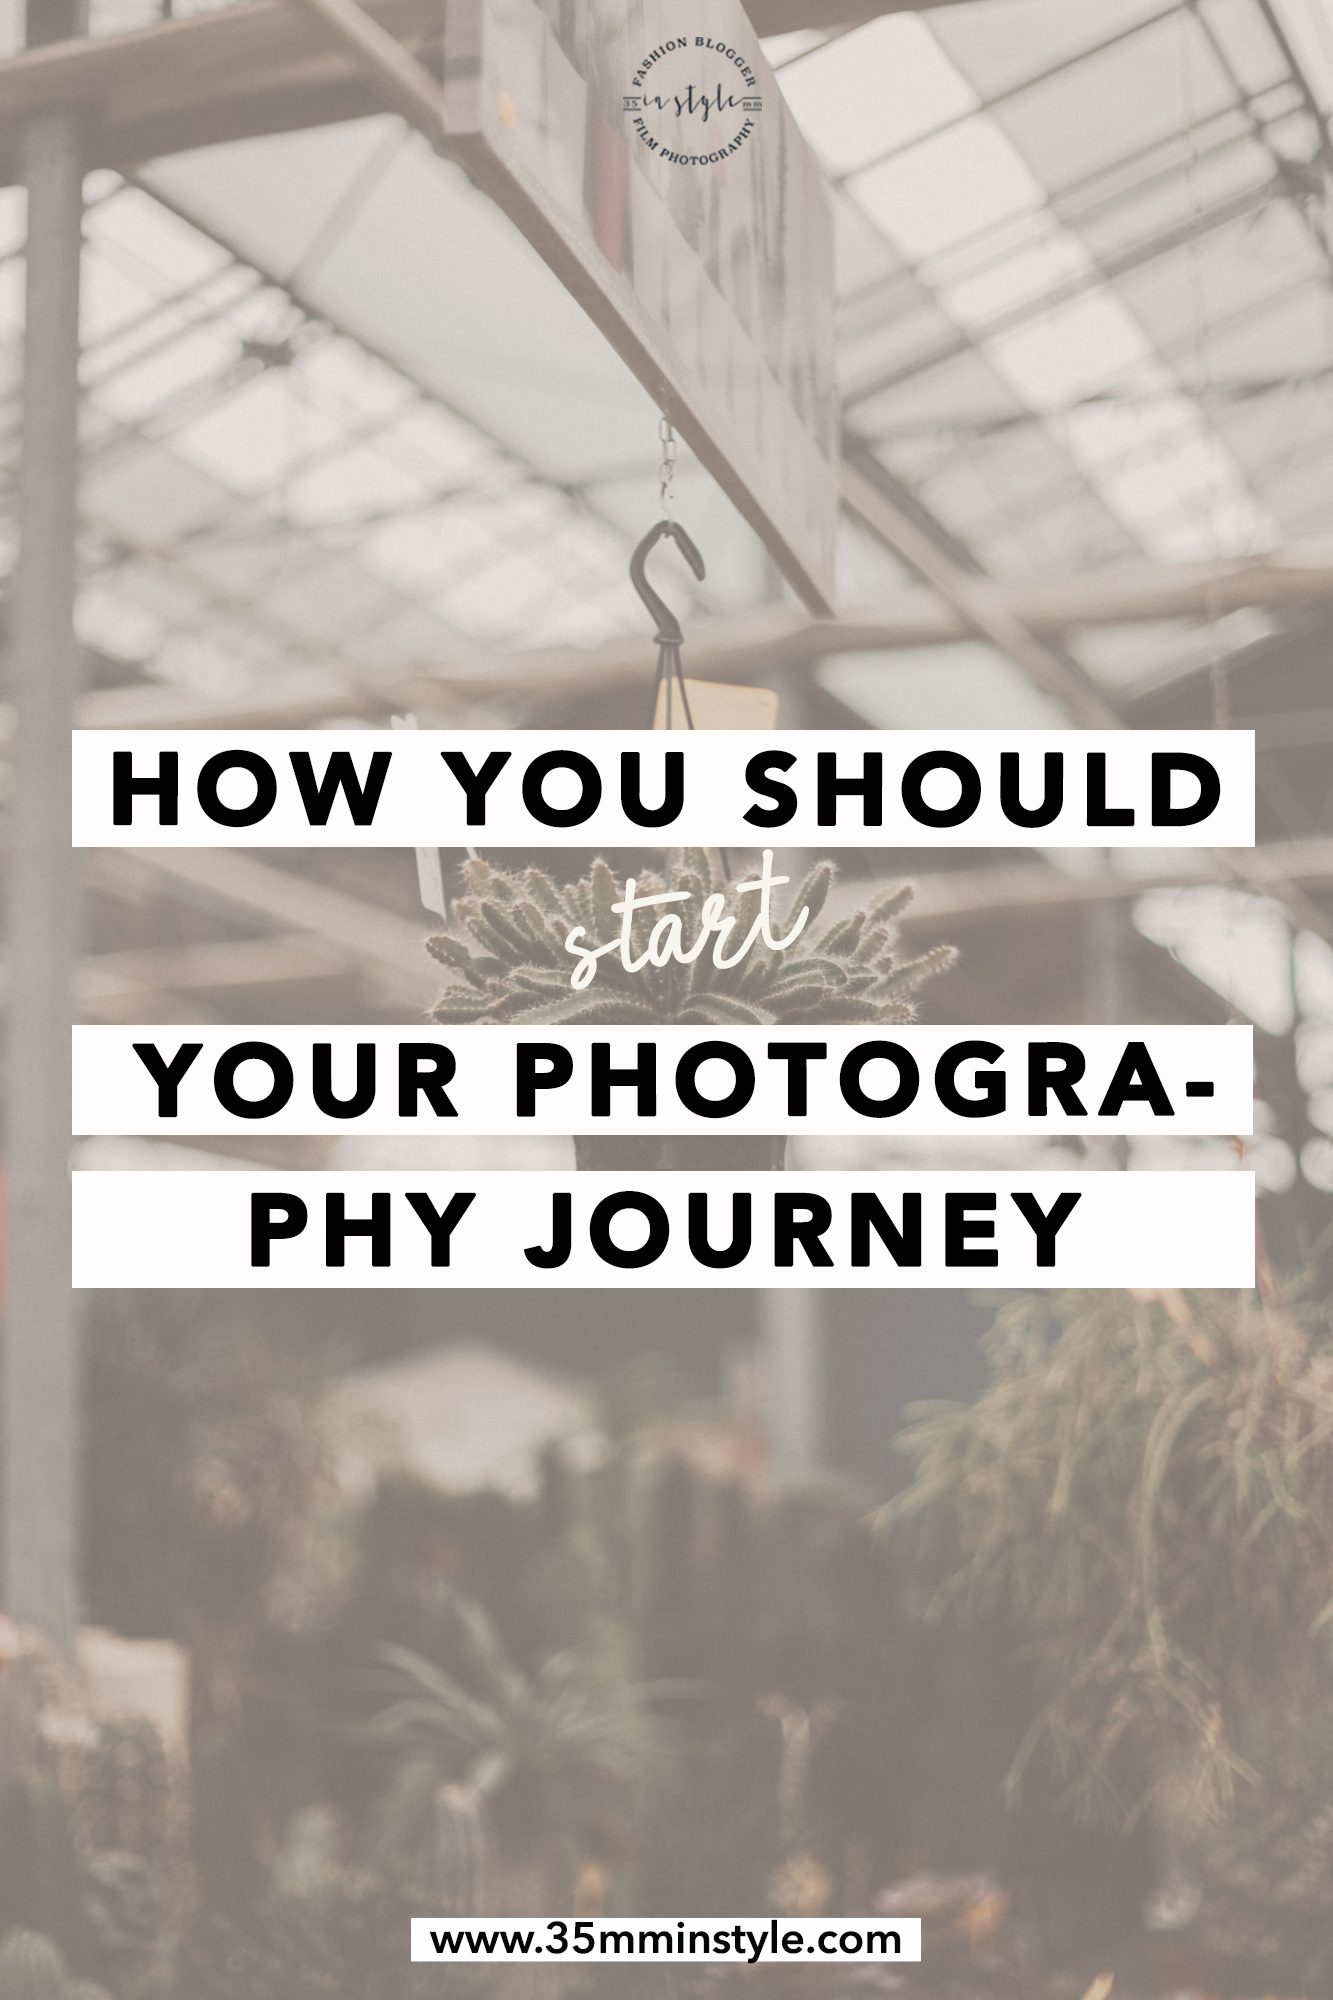 how you should start your photography journey tips to start learning photography and master photography 101